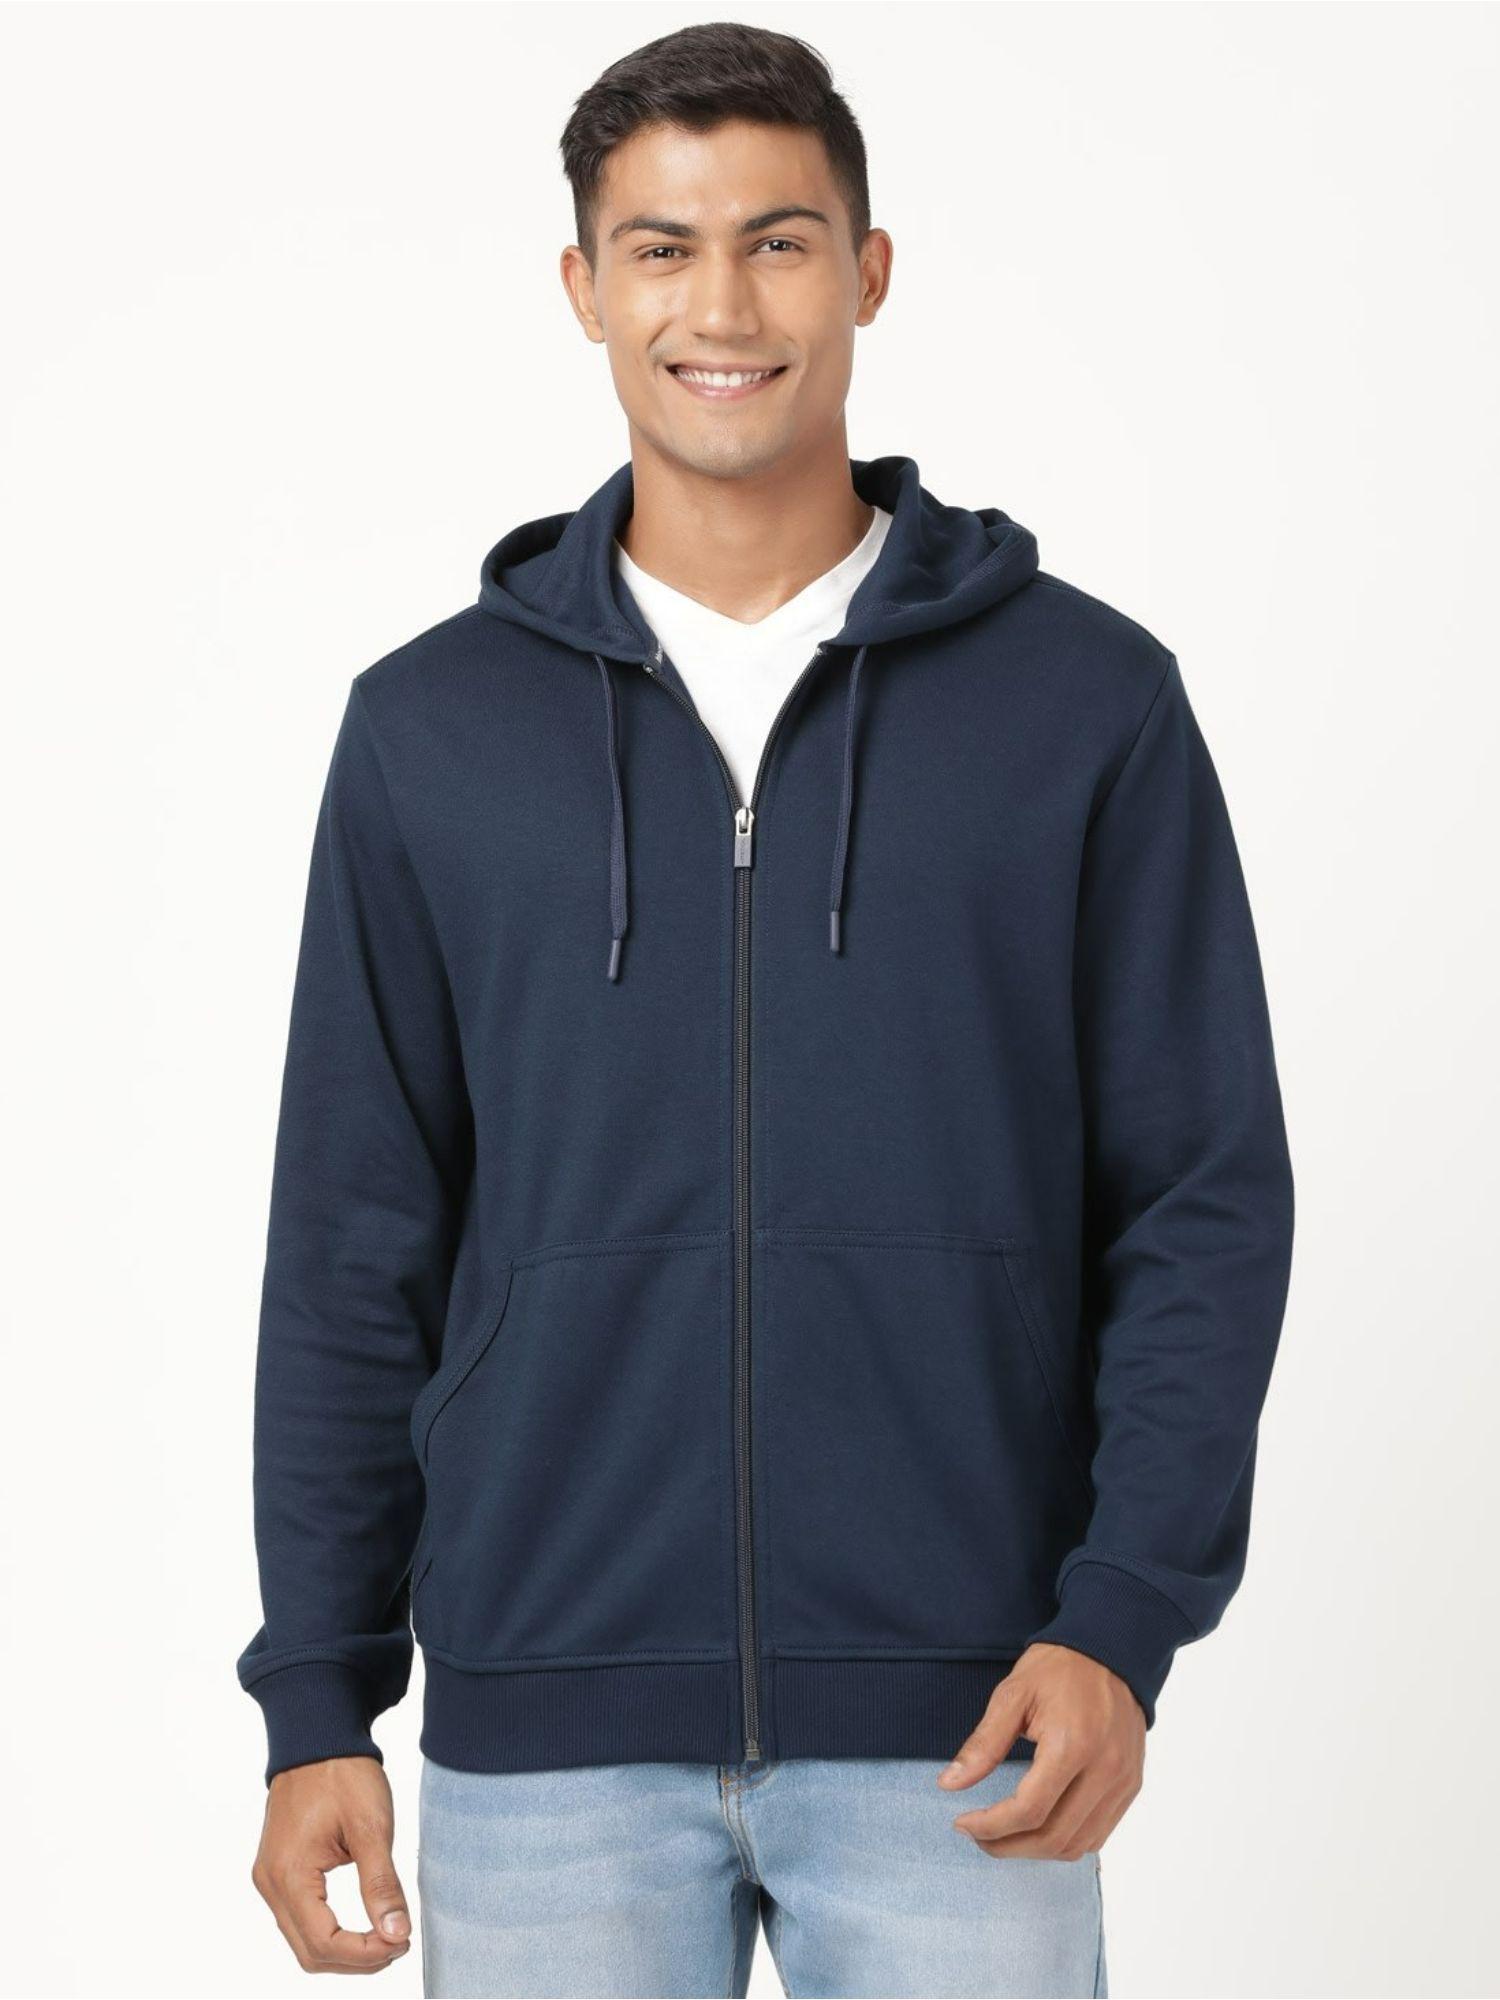 am61-mens-cotton-rich-pique-solid-hoodie-jacket-with-ribbed-cuffs-blue